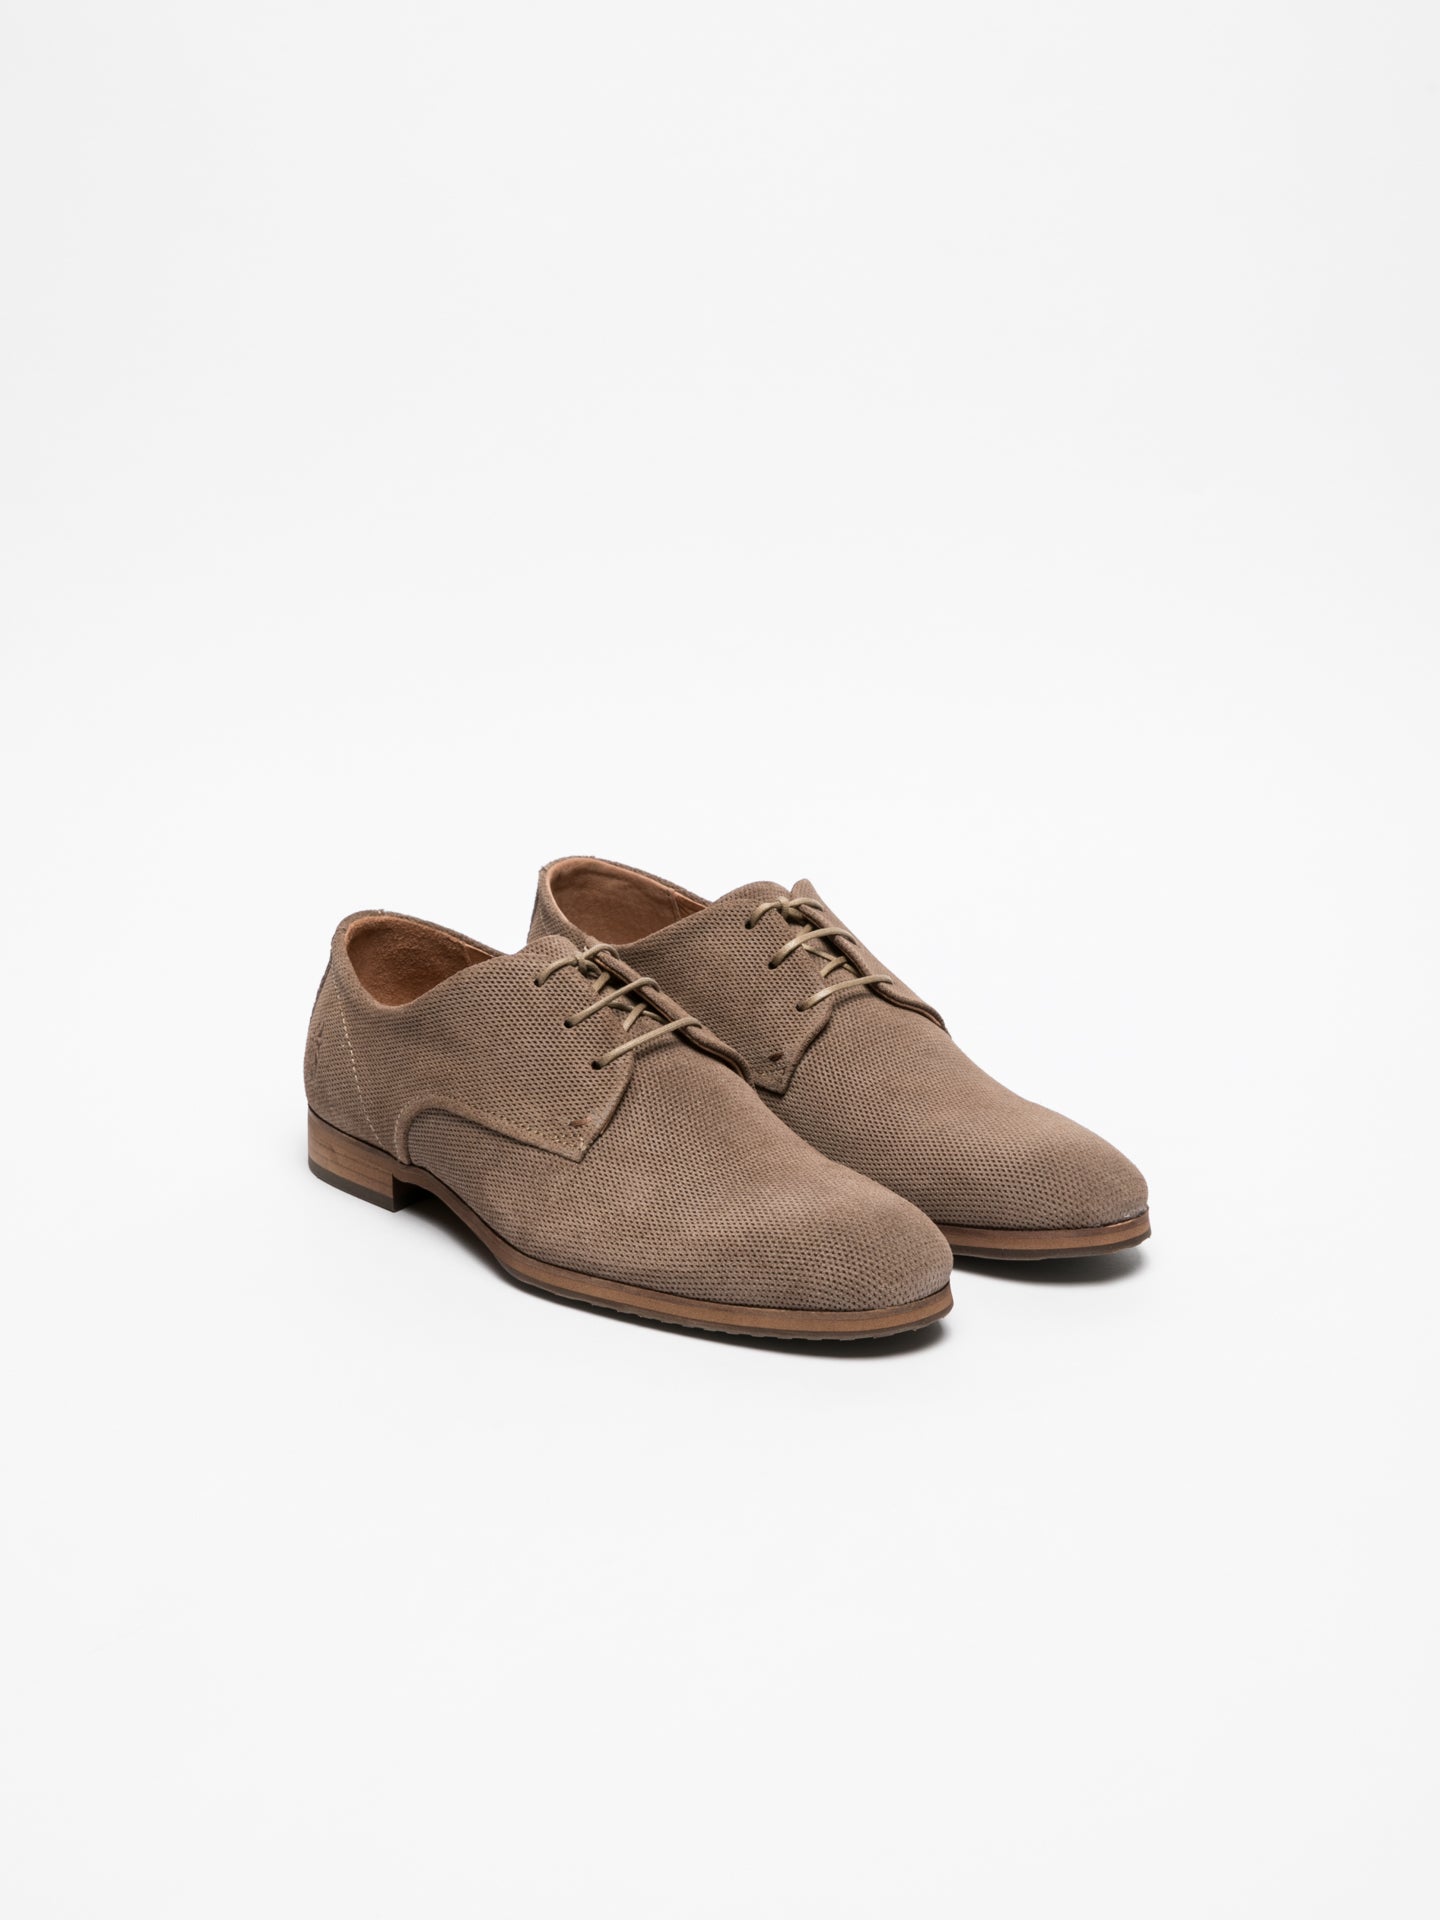 Fly London Gray Derby Shoes